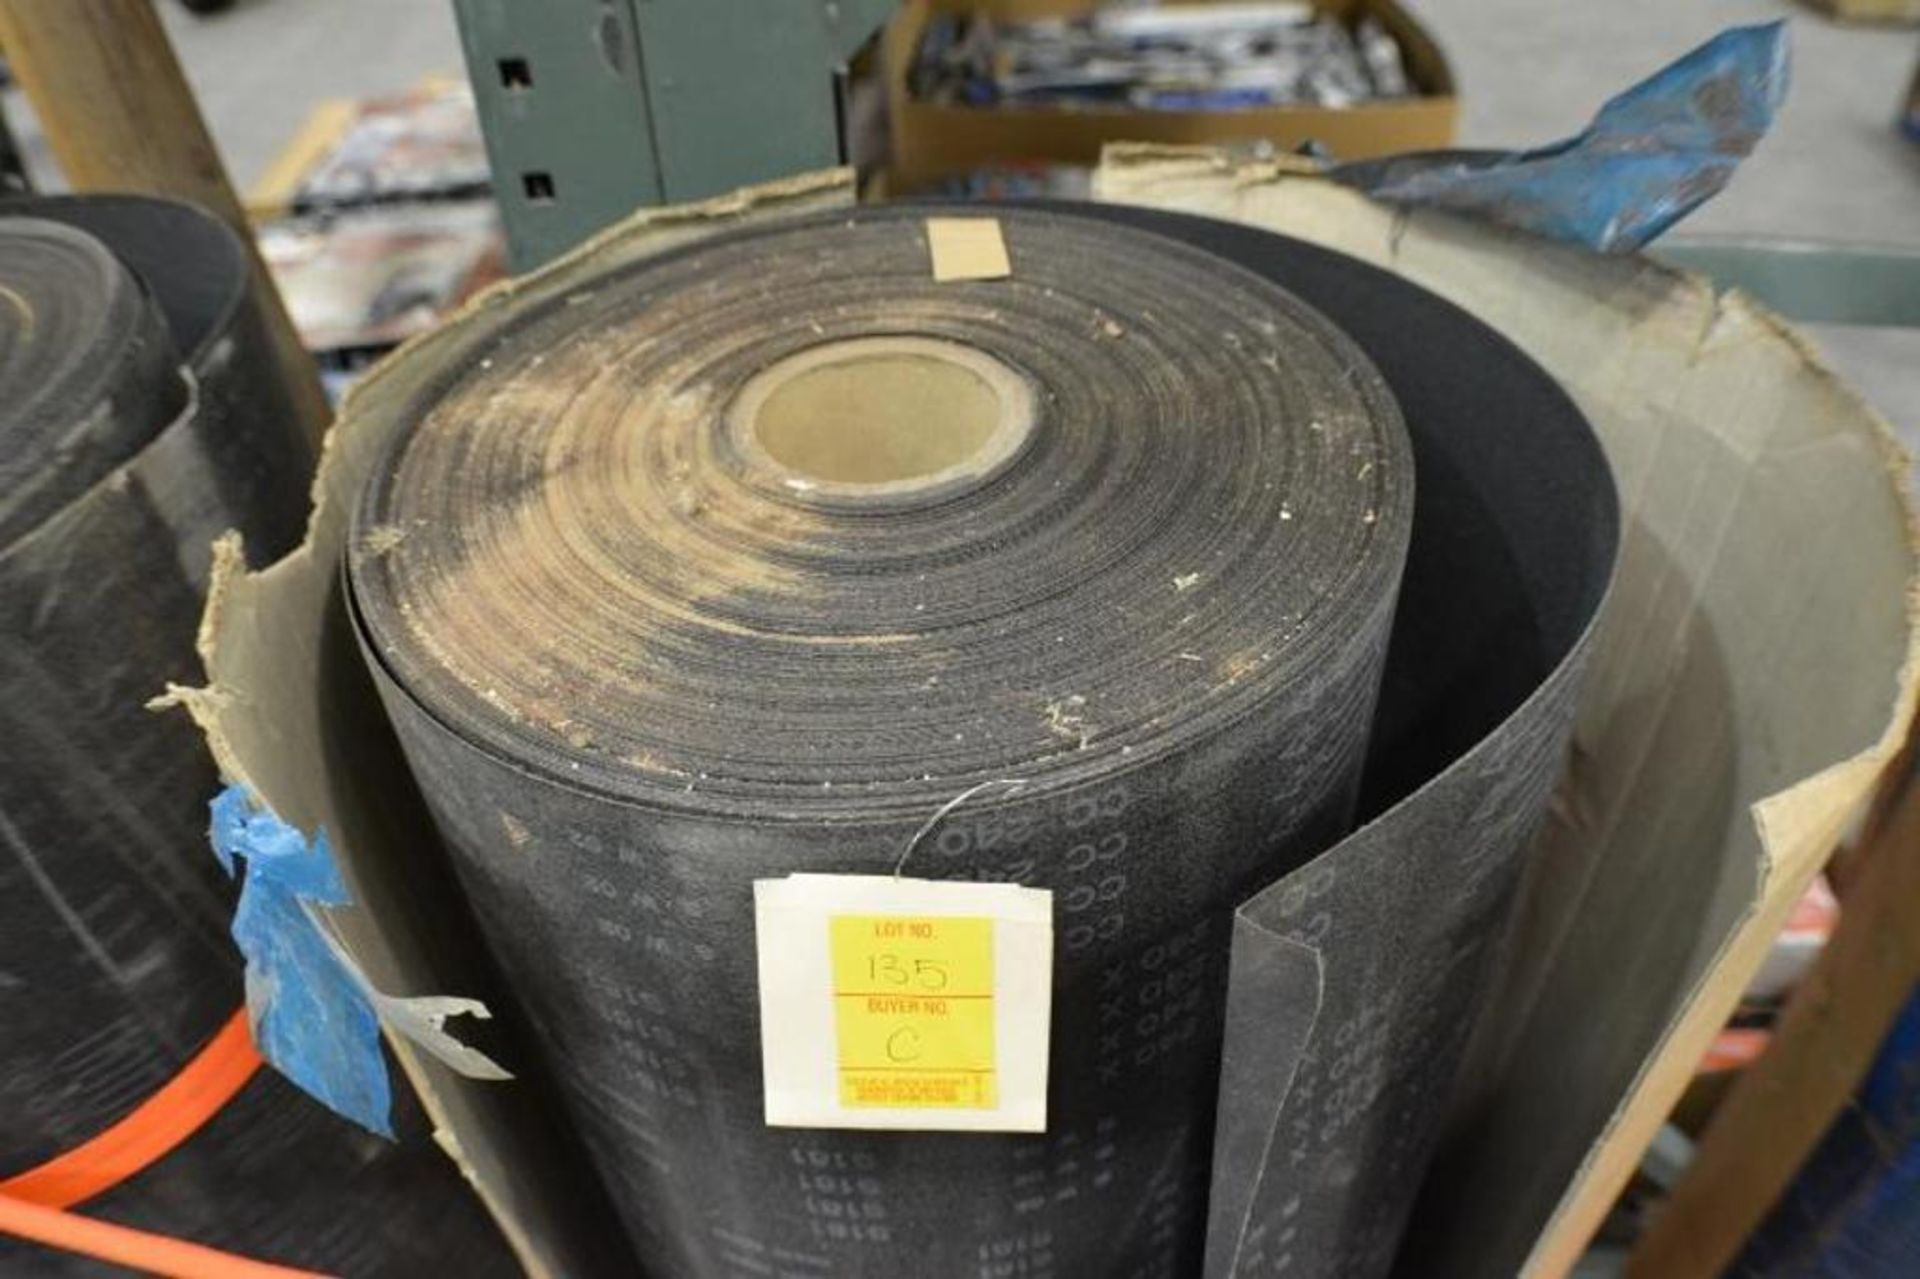 Roll of Sand Paper Grit 240 Approx. 54in. x 100 yard - Image 2 of 2